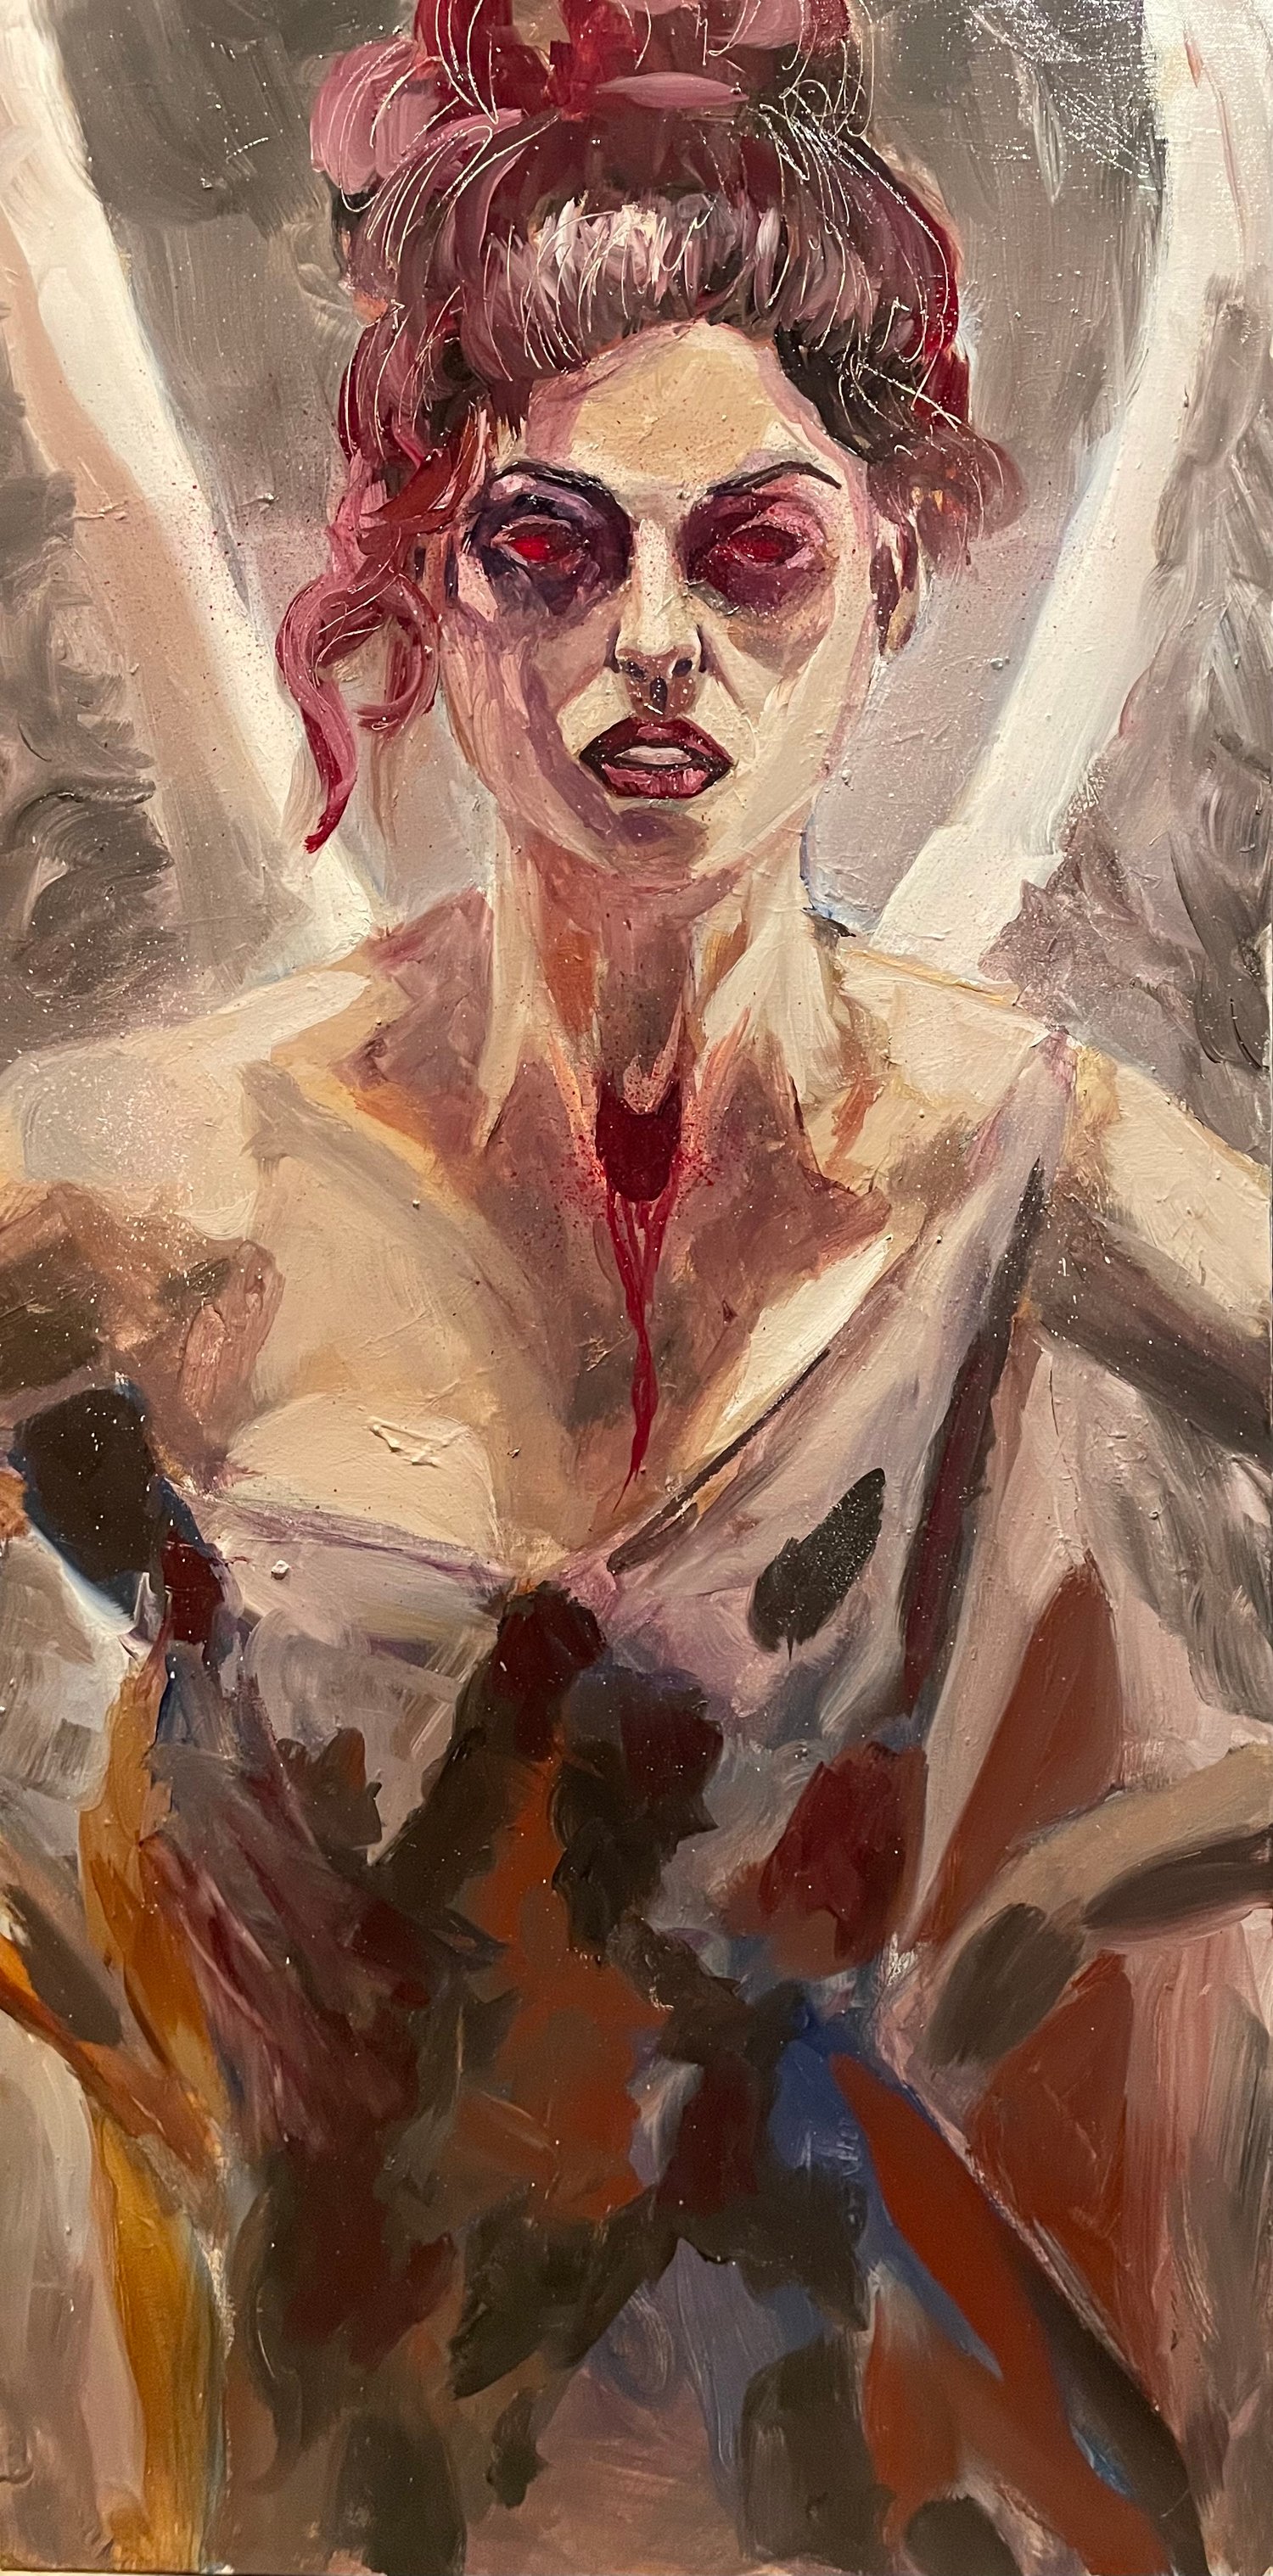 Daily painting - The Angel of blind fury